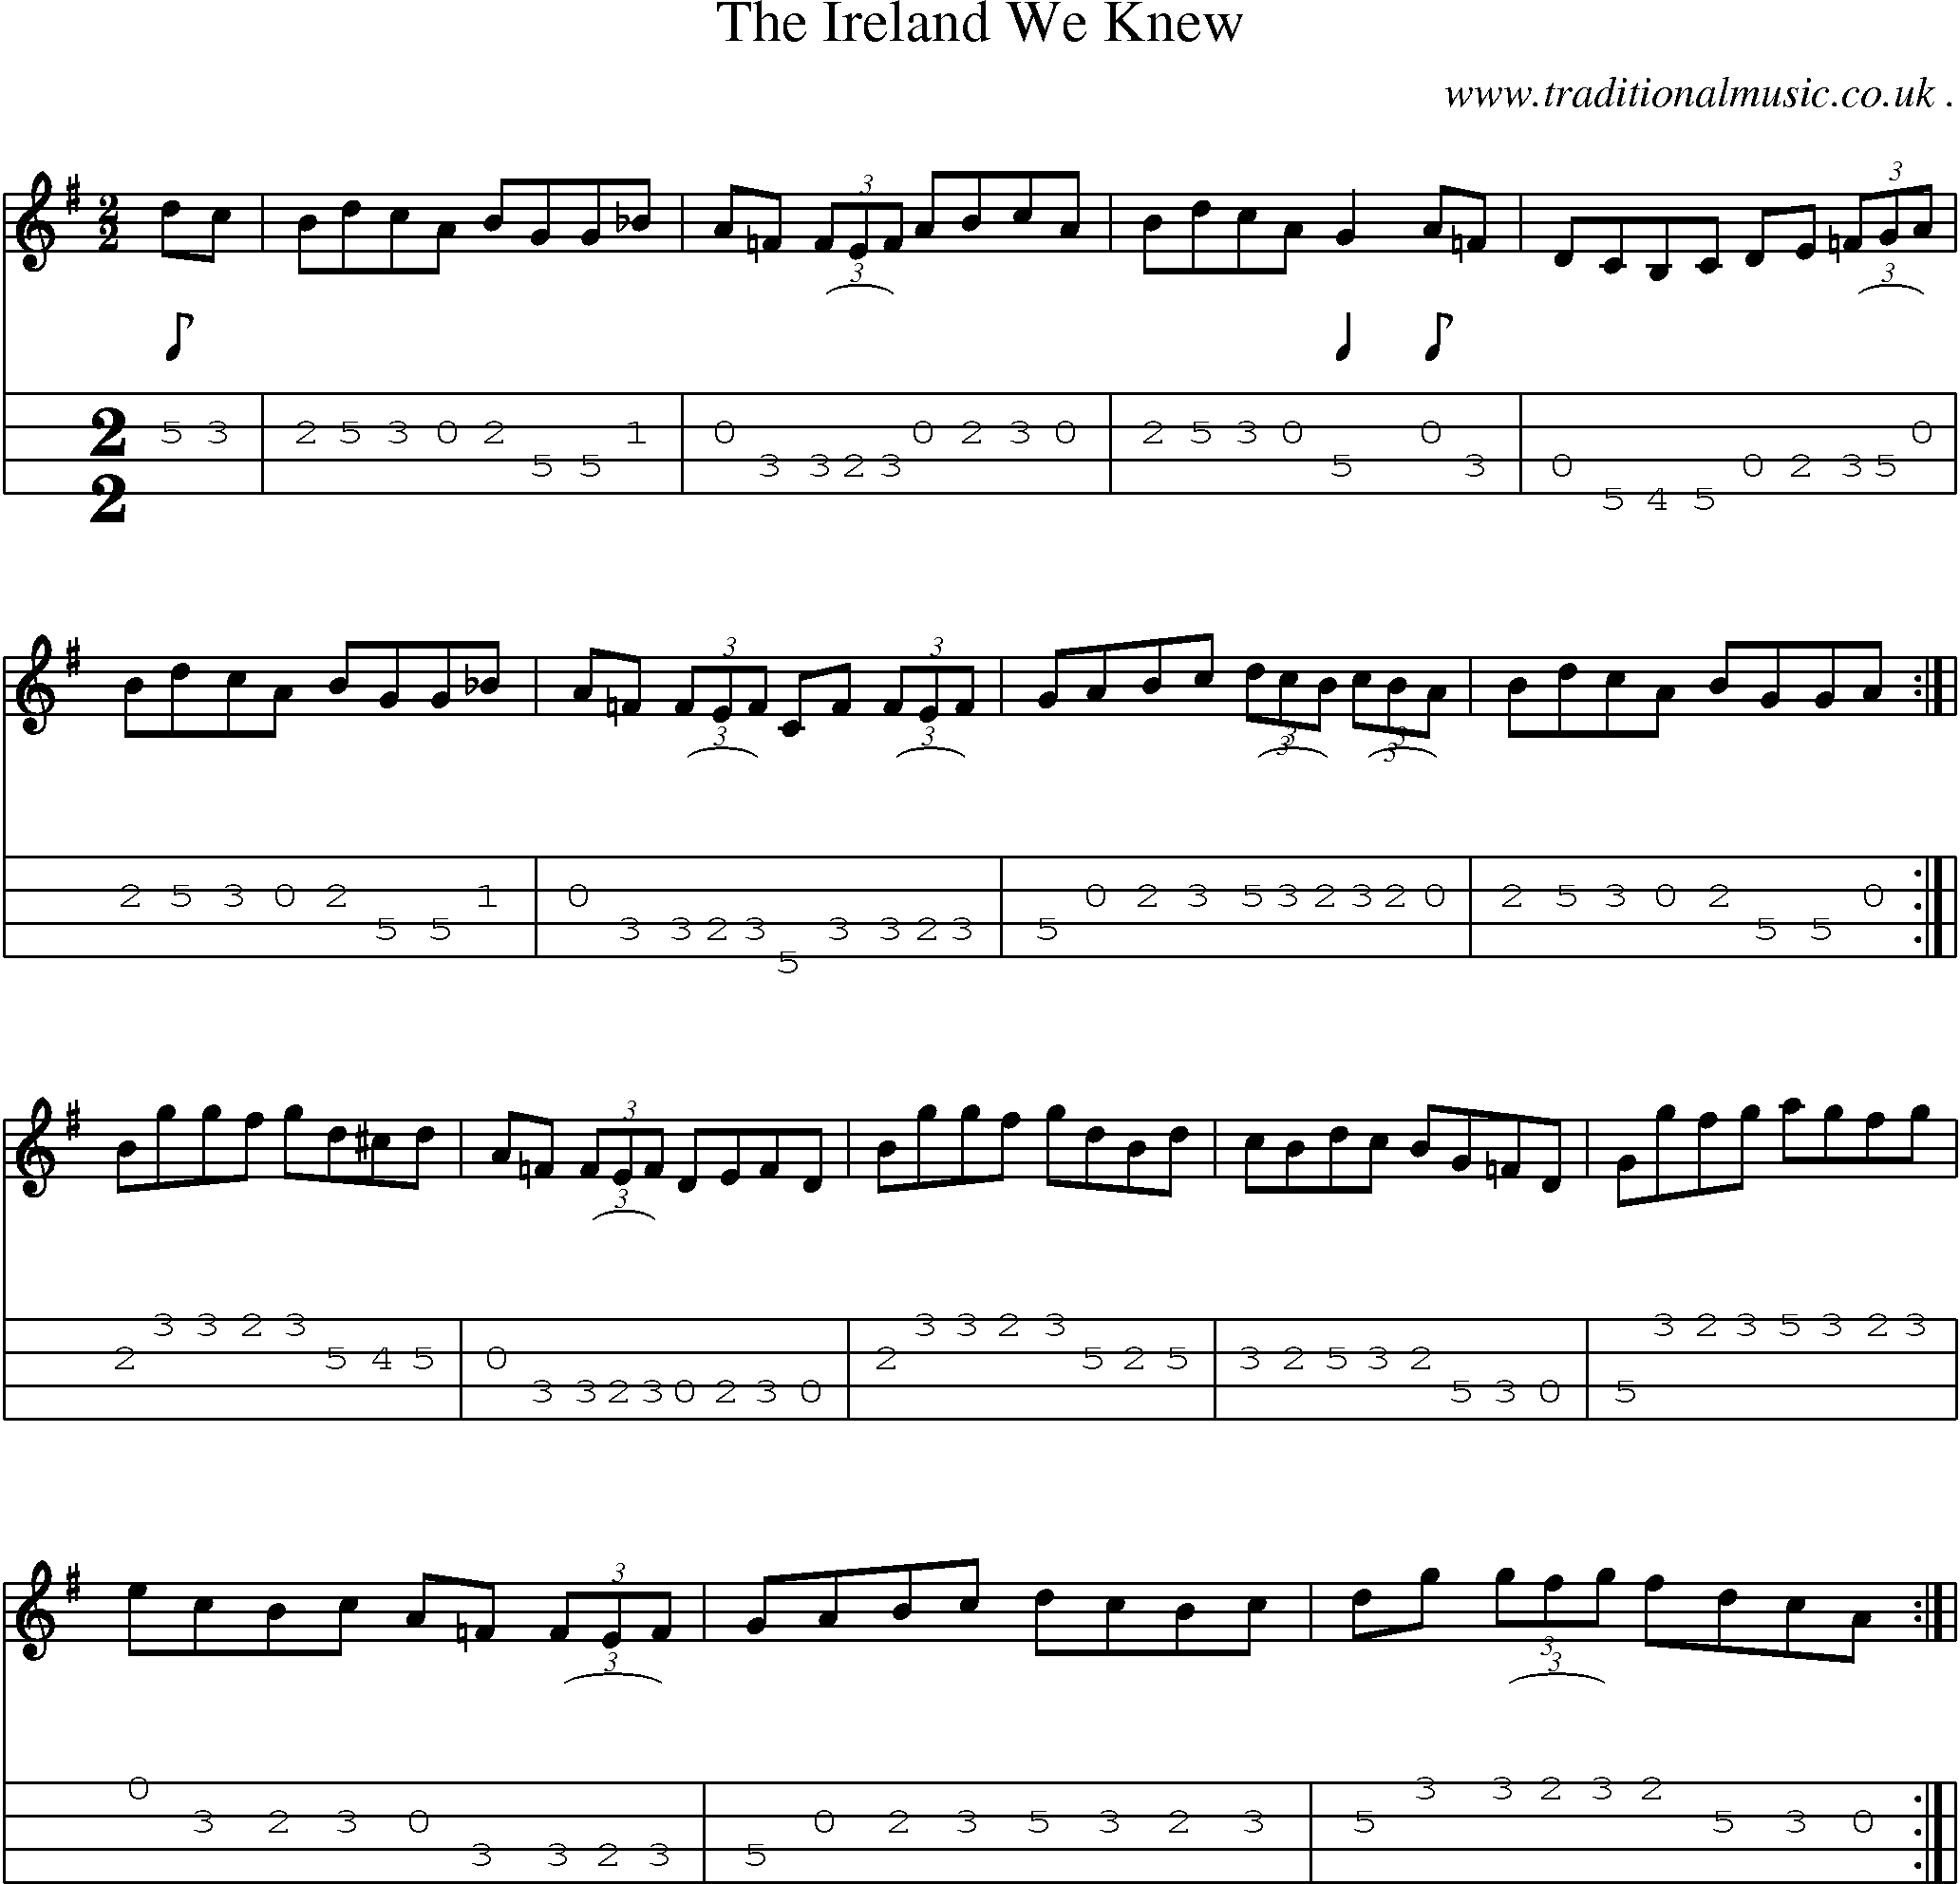 Sheet-Music and Mandolin Tabs for The Ireland We Knew